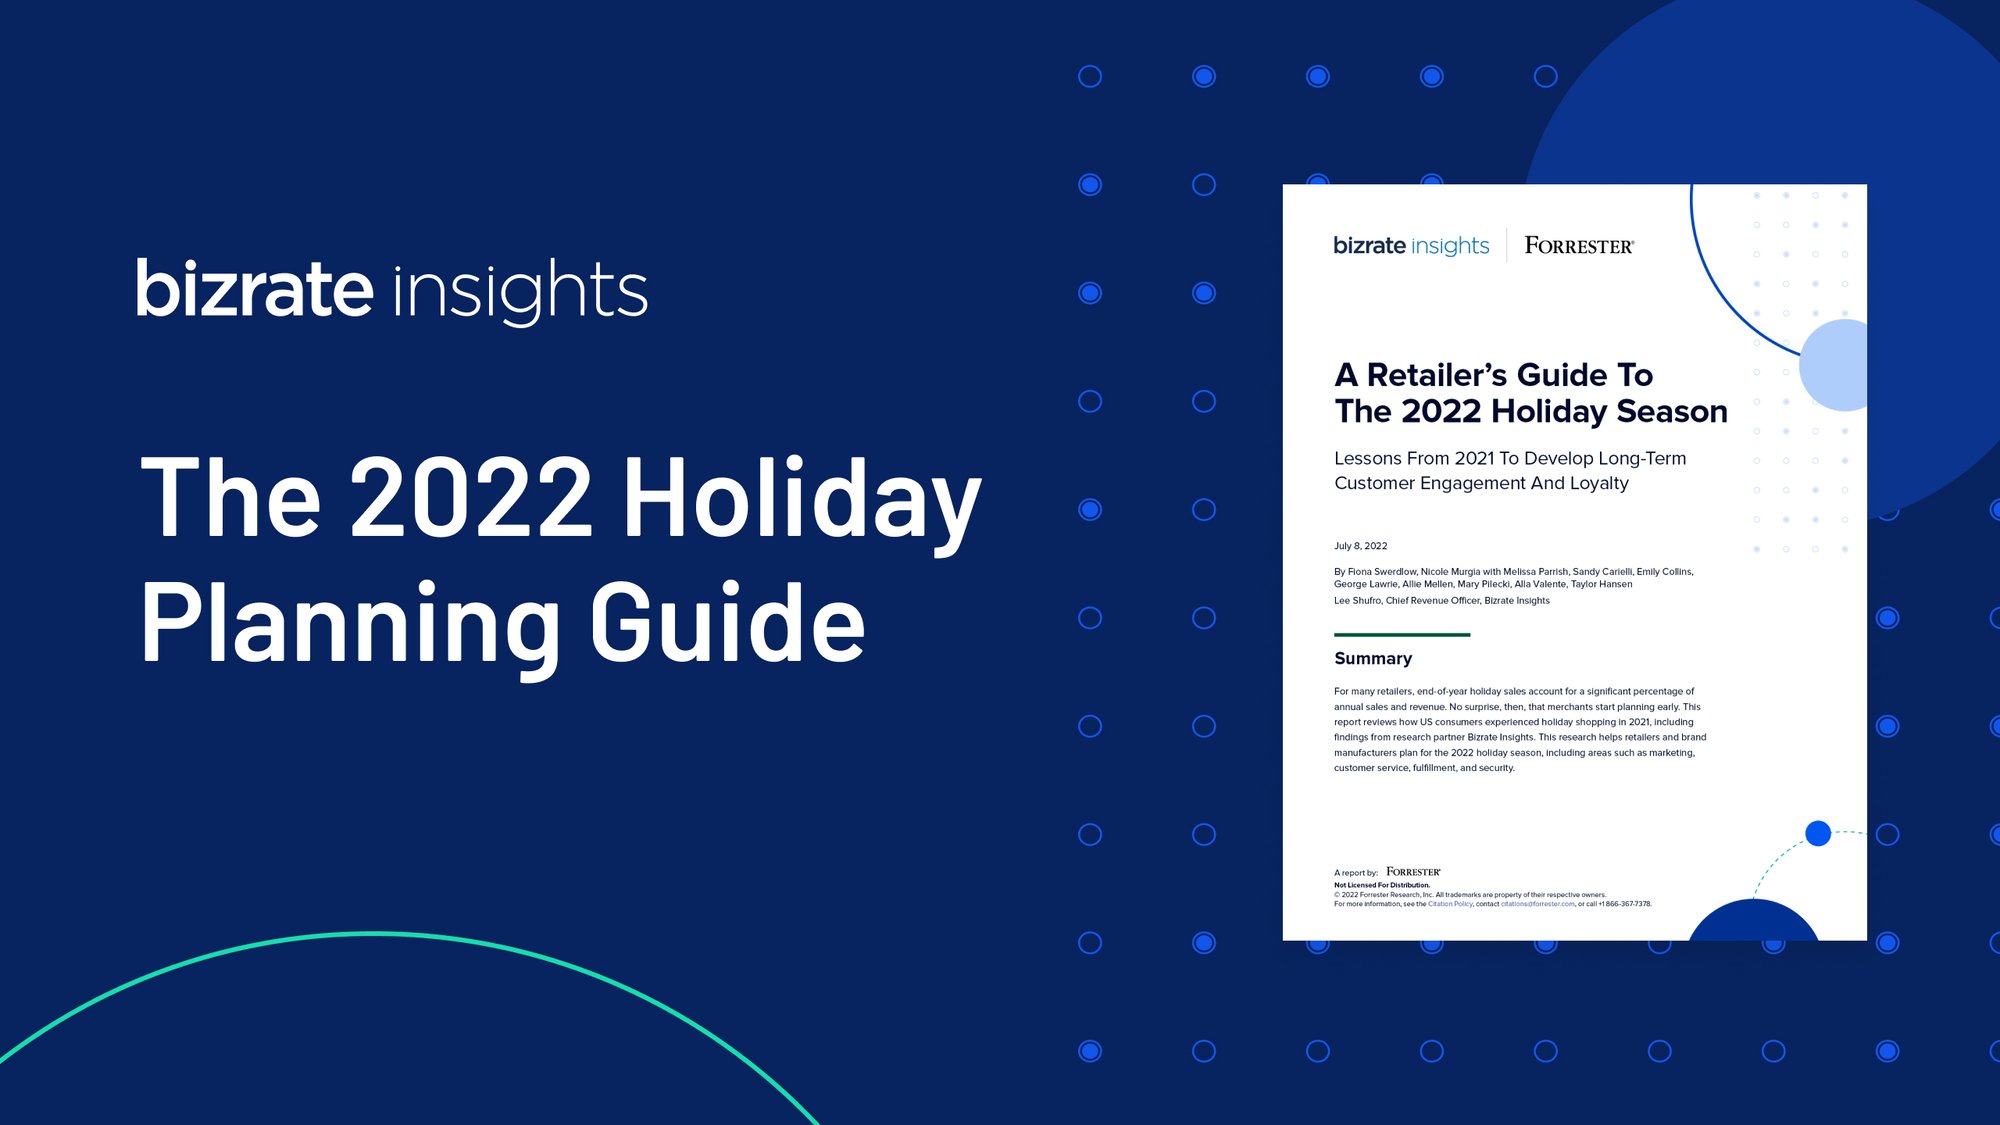 Image_Retailer___s__Guide_To_The_2022_Holiday_Season_7